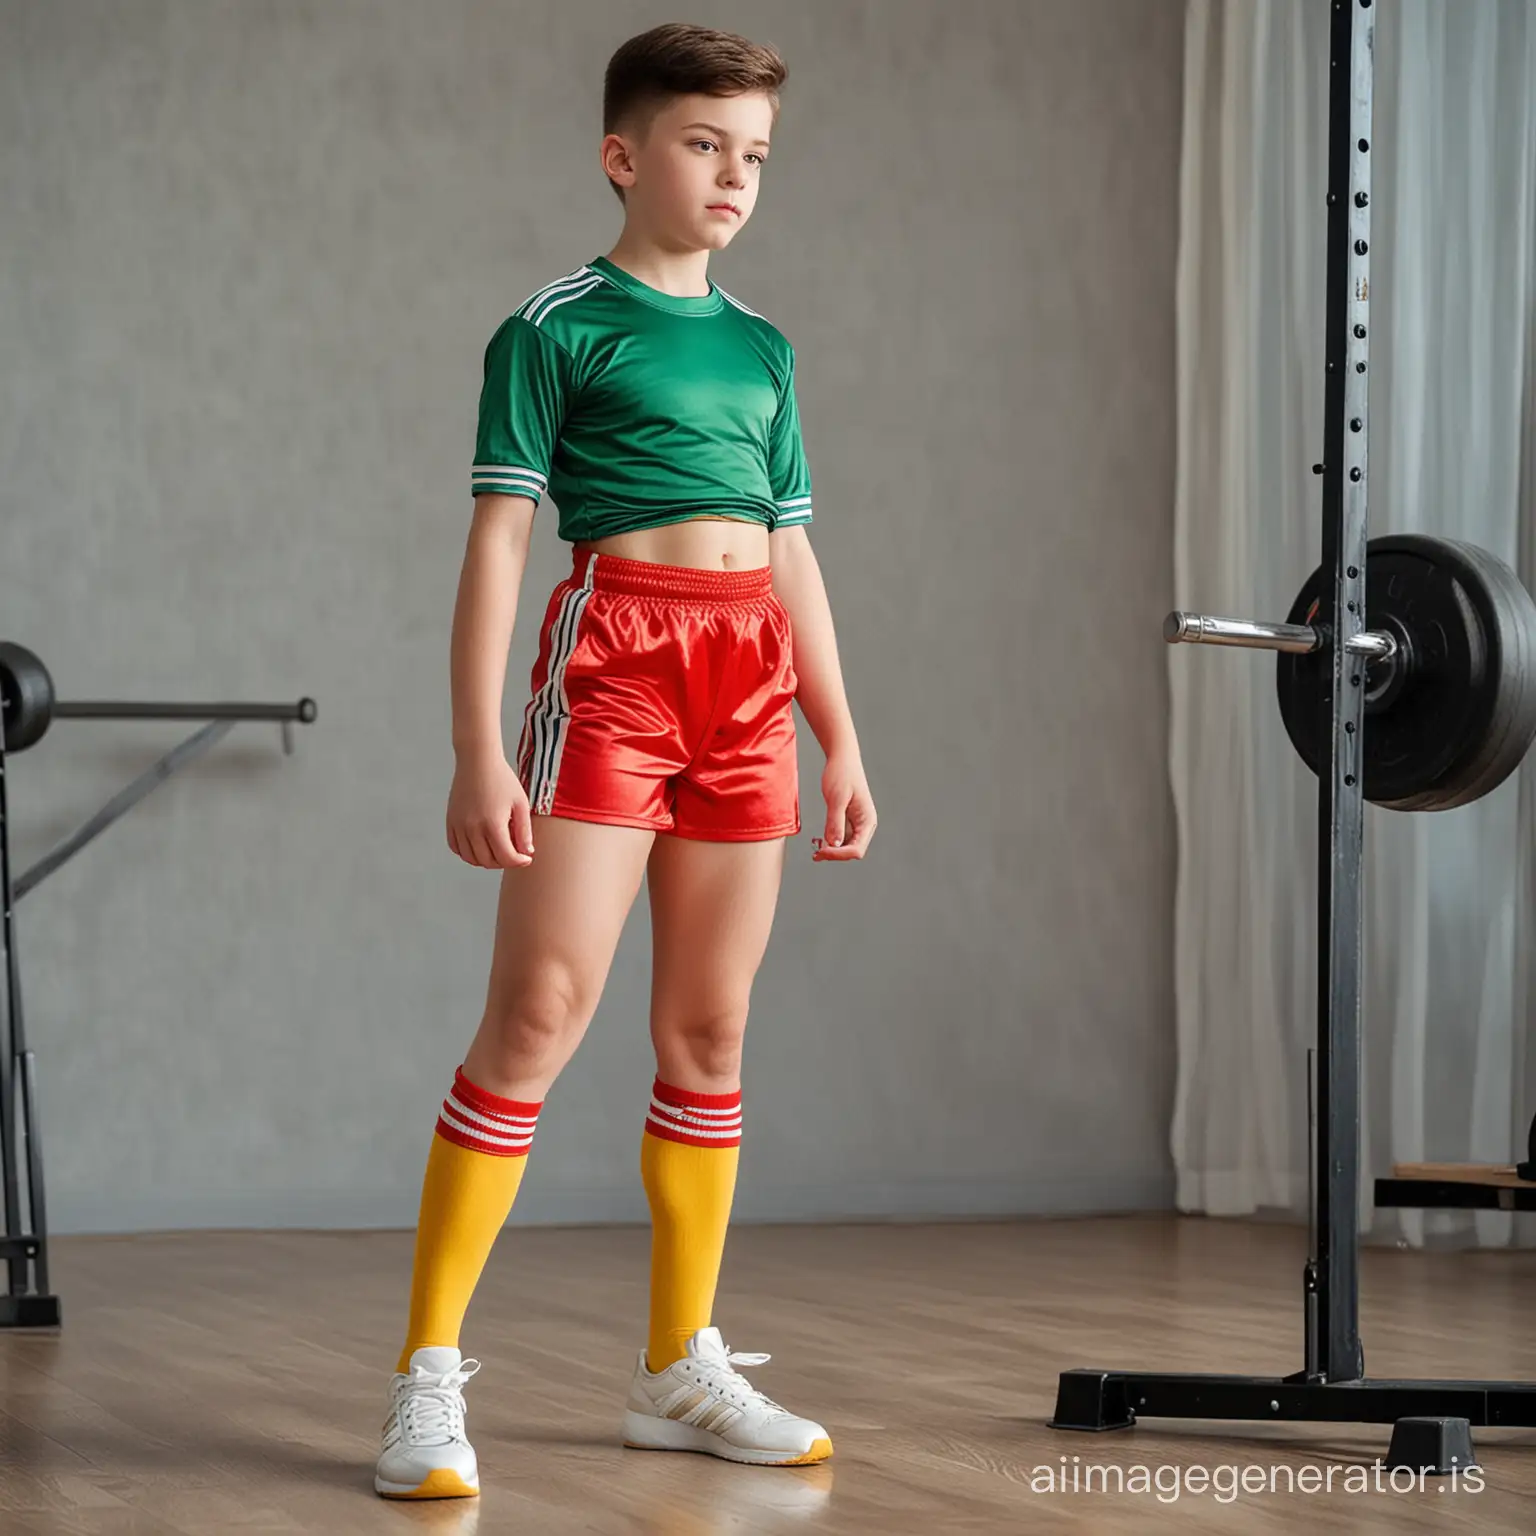 A 14-year-old boy in a green short-sleeved T-shirt, very short shiny satin red shorts, long yellow knee-high socks with three blue stripes and white sneakers stands in the gym and exercises with dumbbells., photo